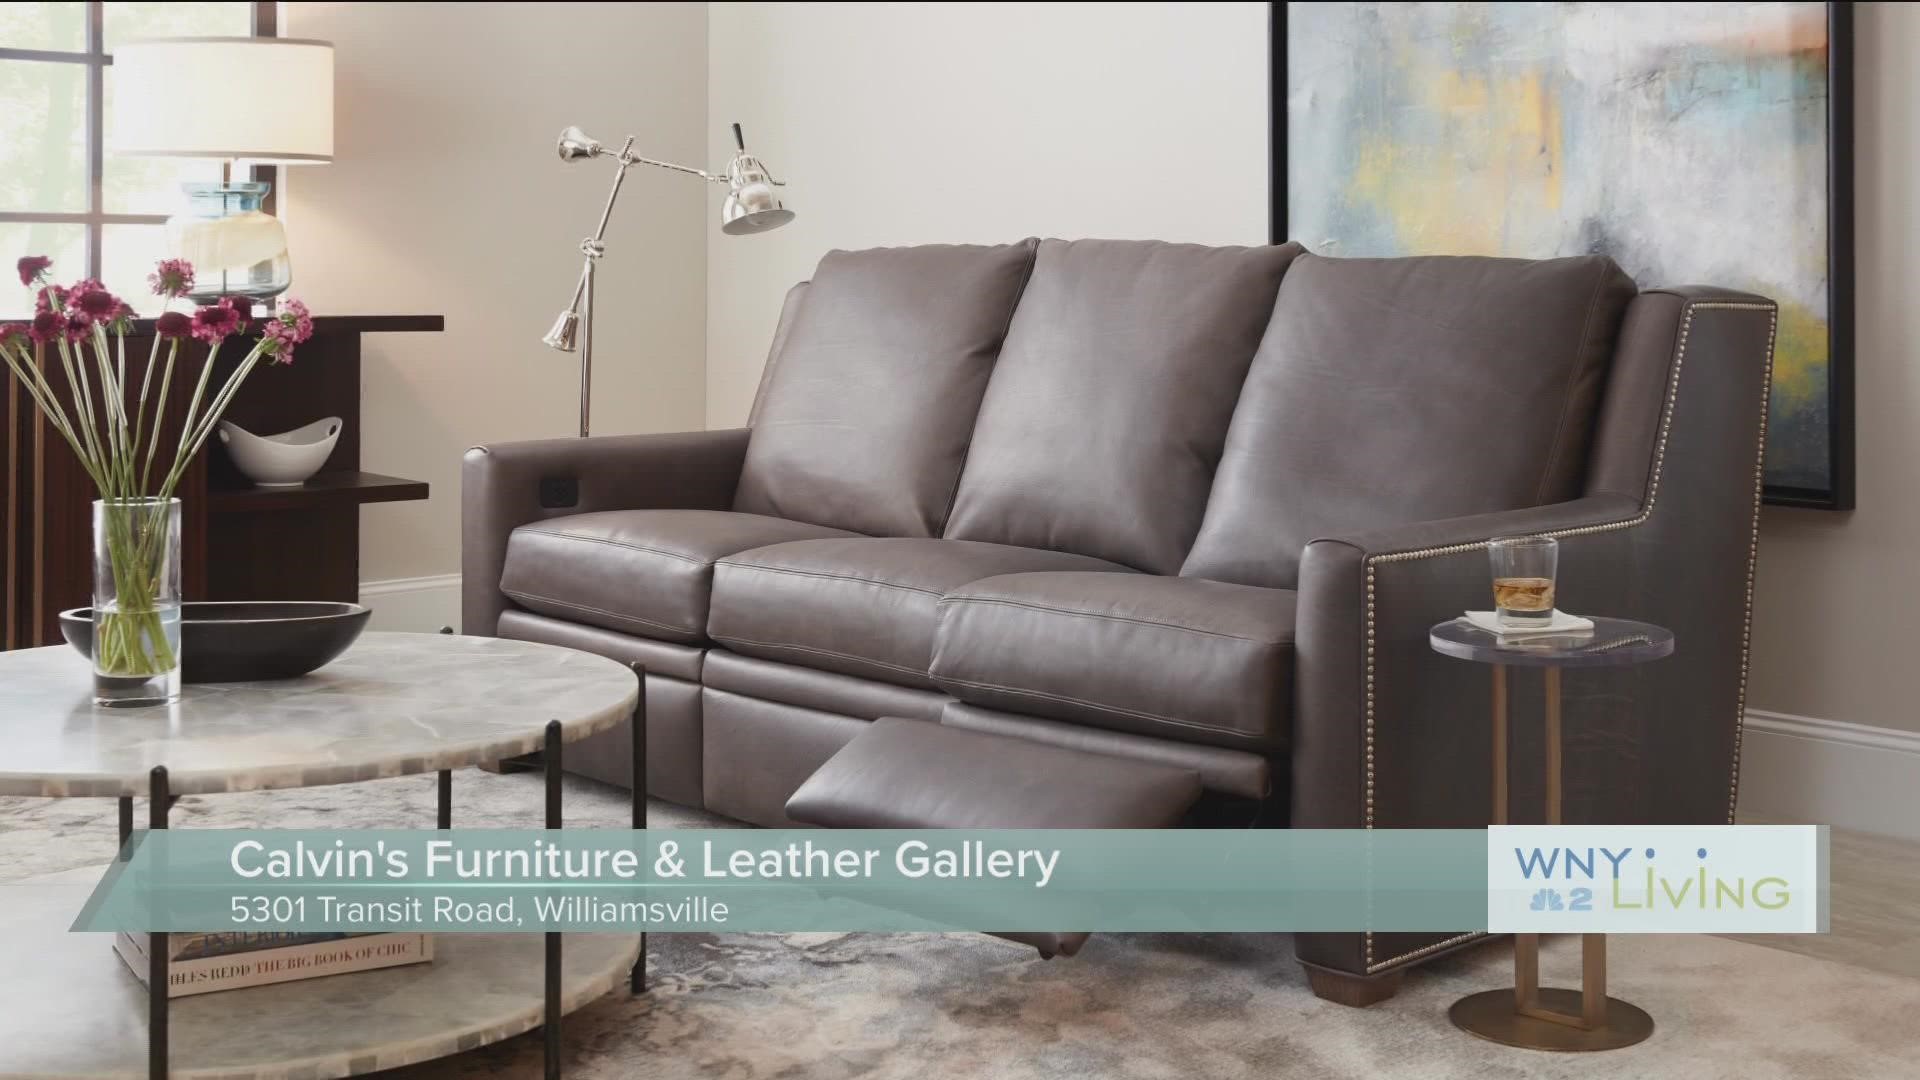 WNY Living - November 19 - Calvin's Furniture & Leather Gallery (THIS VIDEO IS SPONSORED BY CALVIN'S FURNITURE & LEATHER GALLERY)